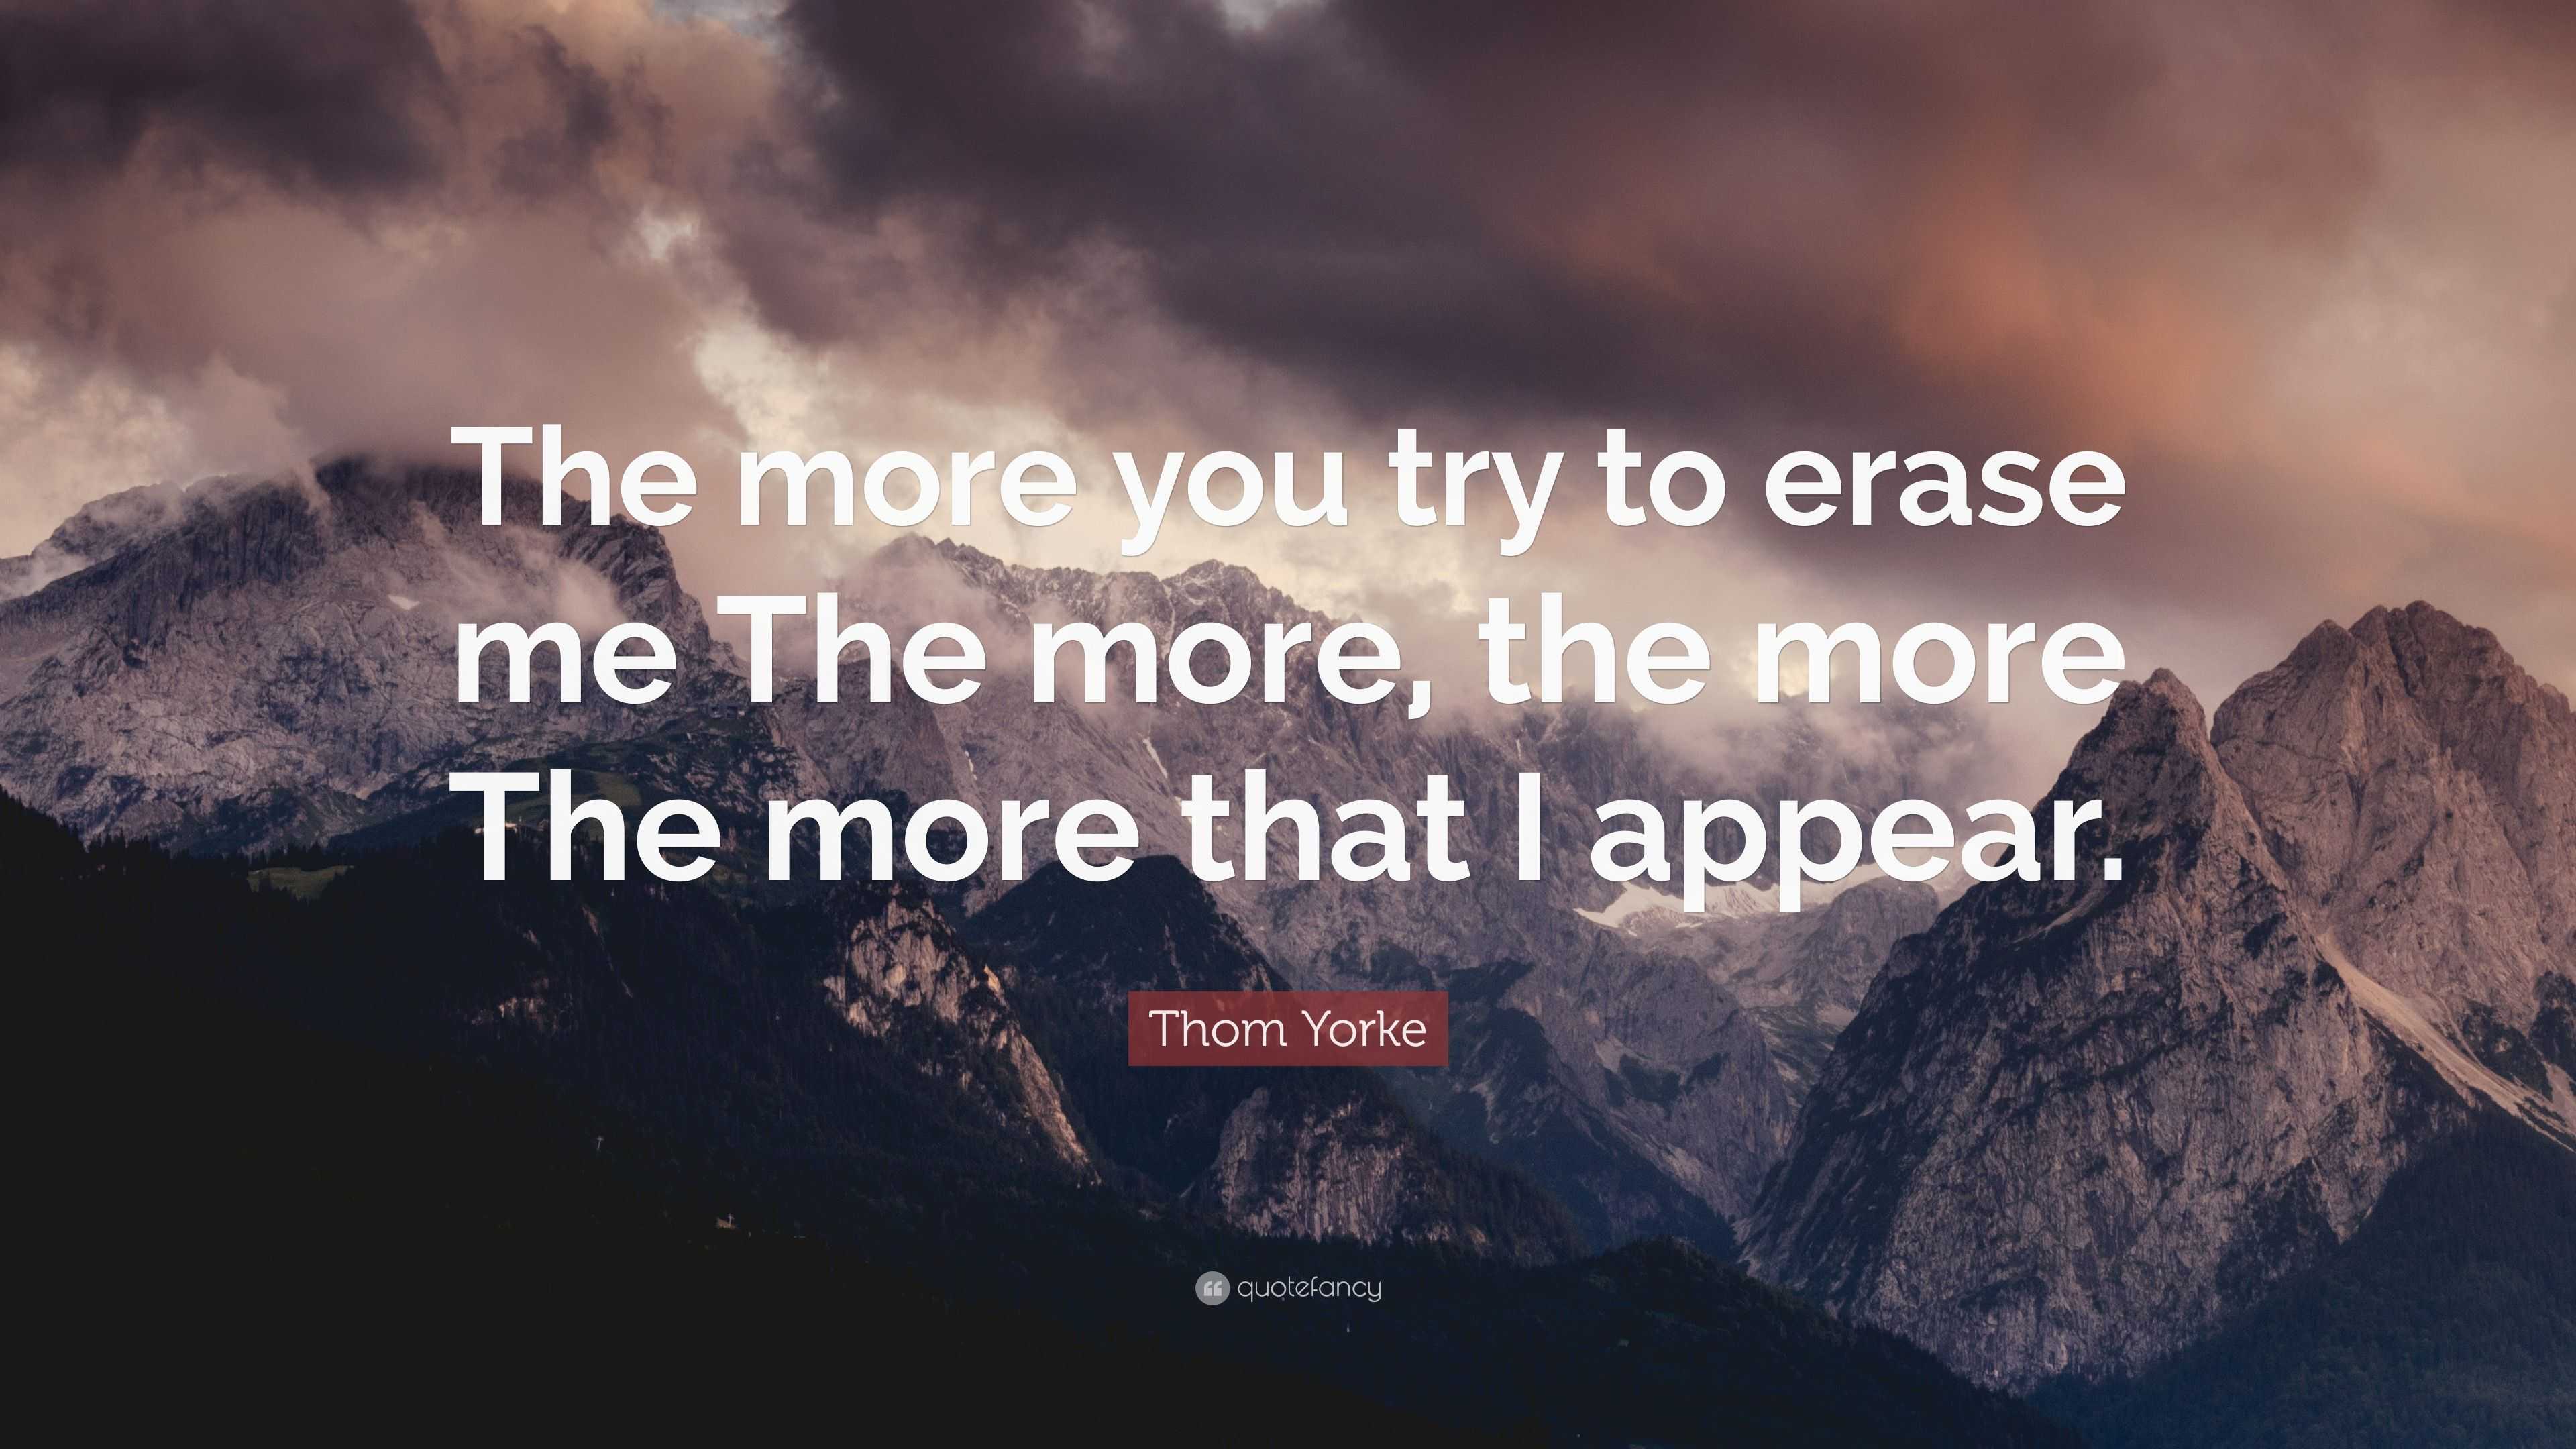 Thom Yorke Quote: “The more you try to erase me The more, the more The ...